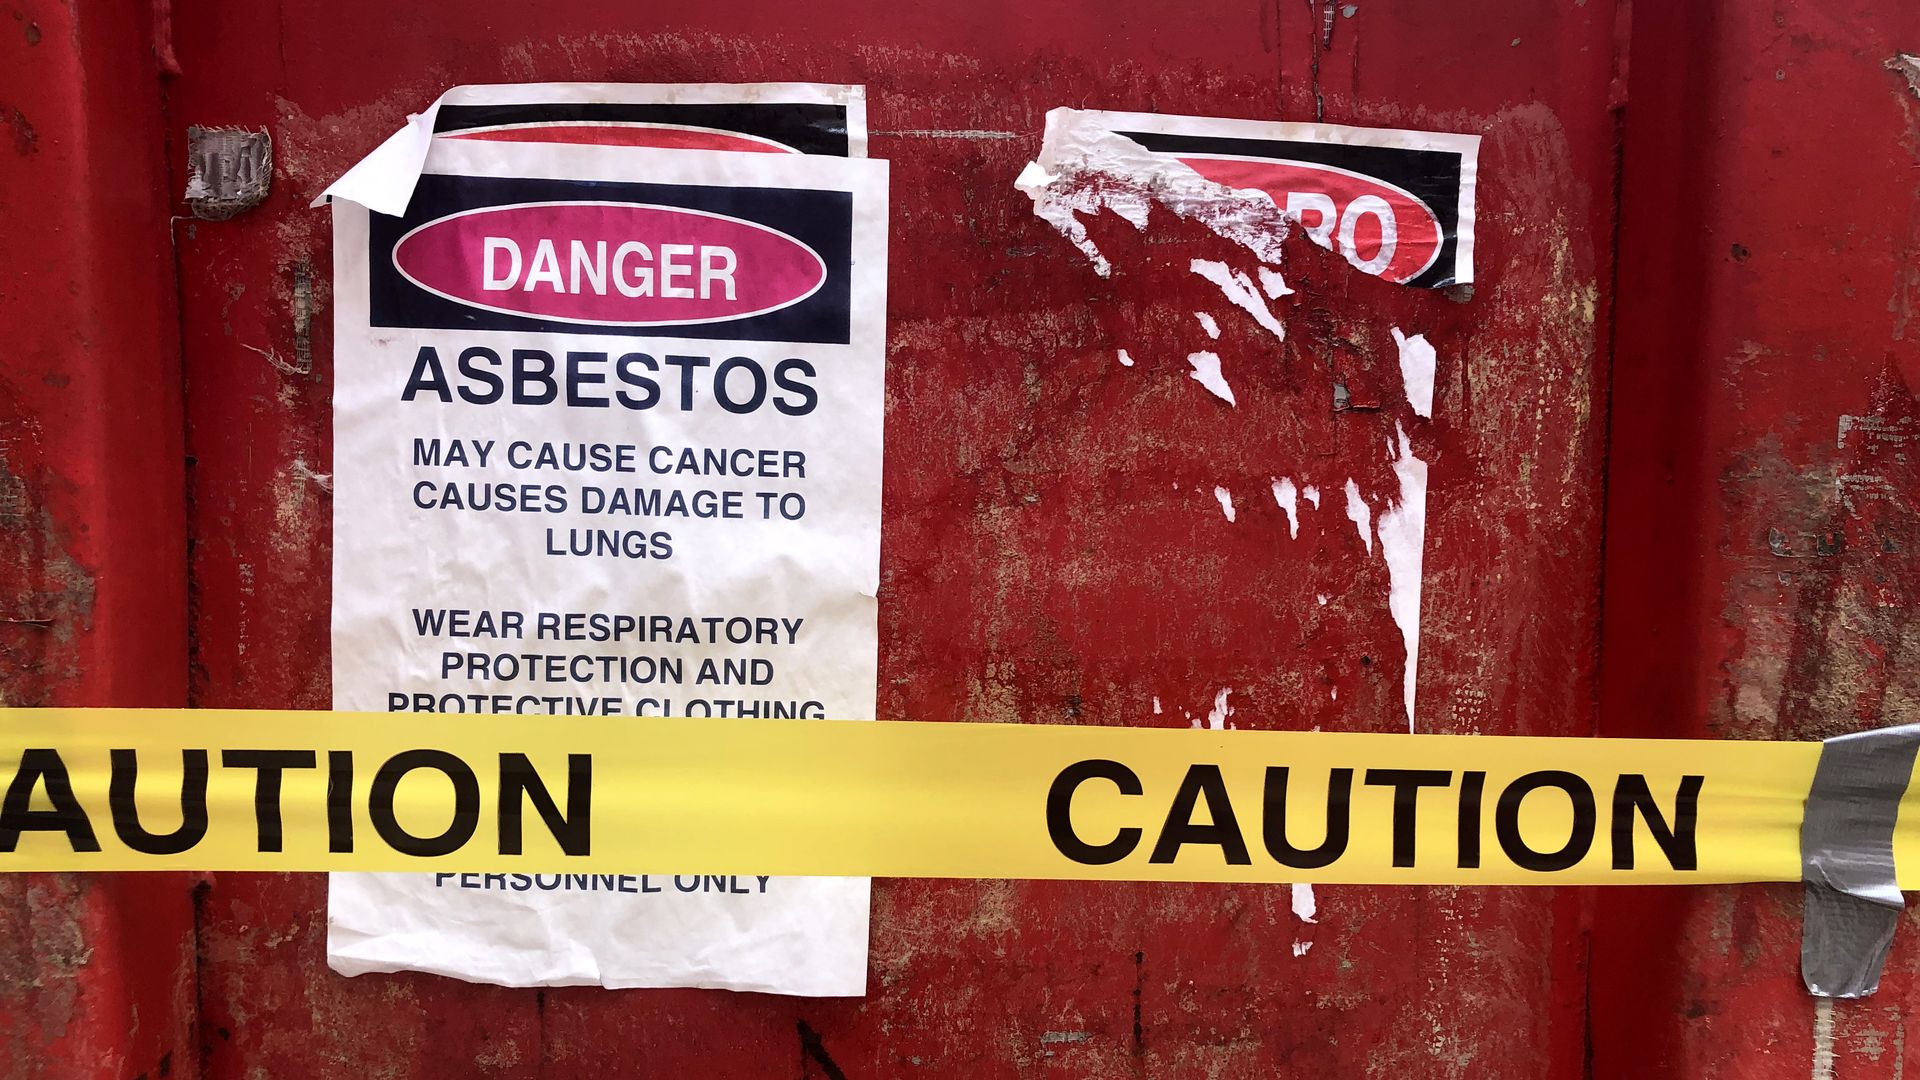 Picture of a "danger" sign for asbestos